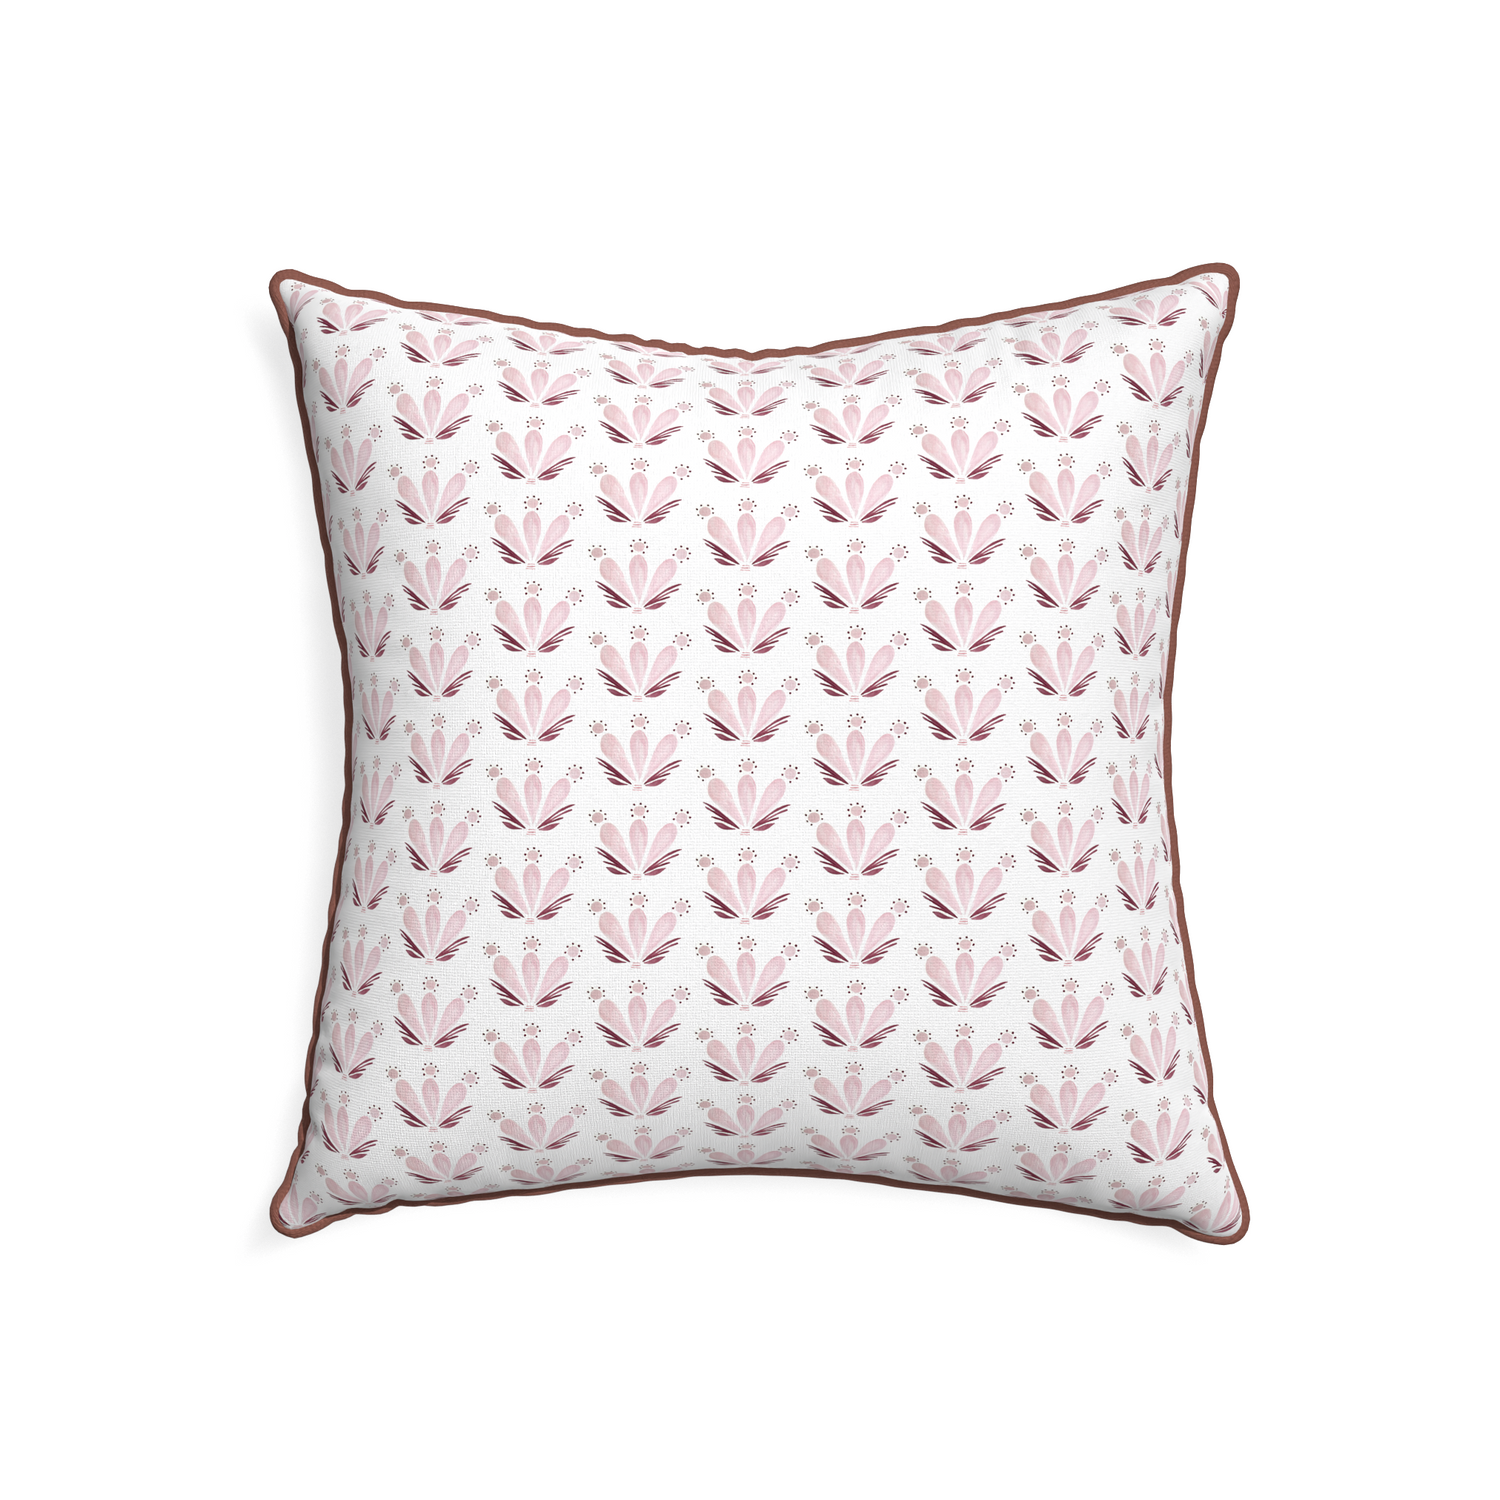 22-square serena pink custom pink & burgundy drop repeat floralpillow with w piping on white background